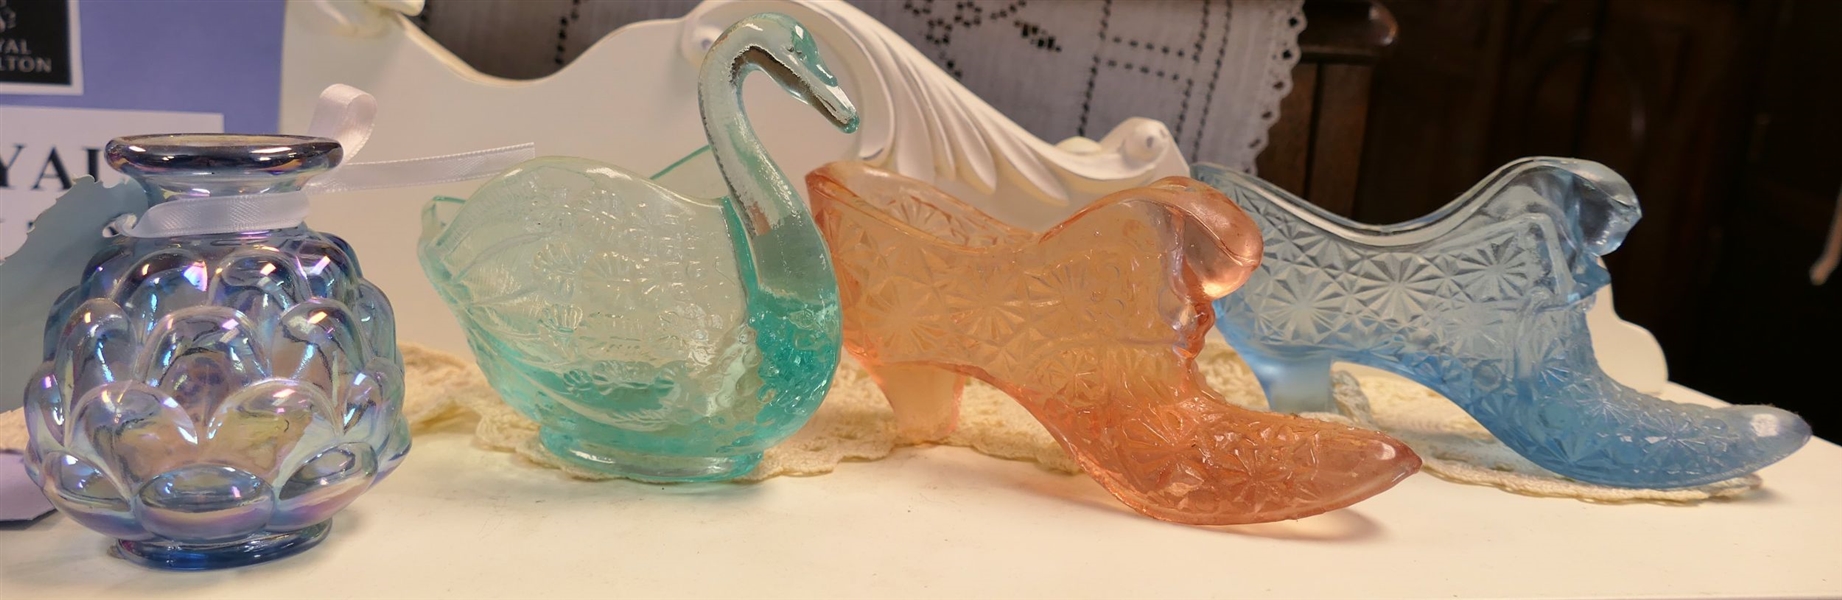 4 Pieces of Fenton - 2 Shoes, Swan, and Small Quilted Vase - Vase Measures 2 1/2" Tall 